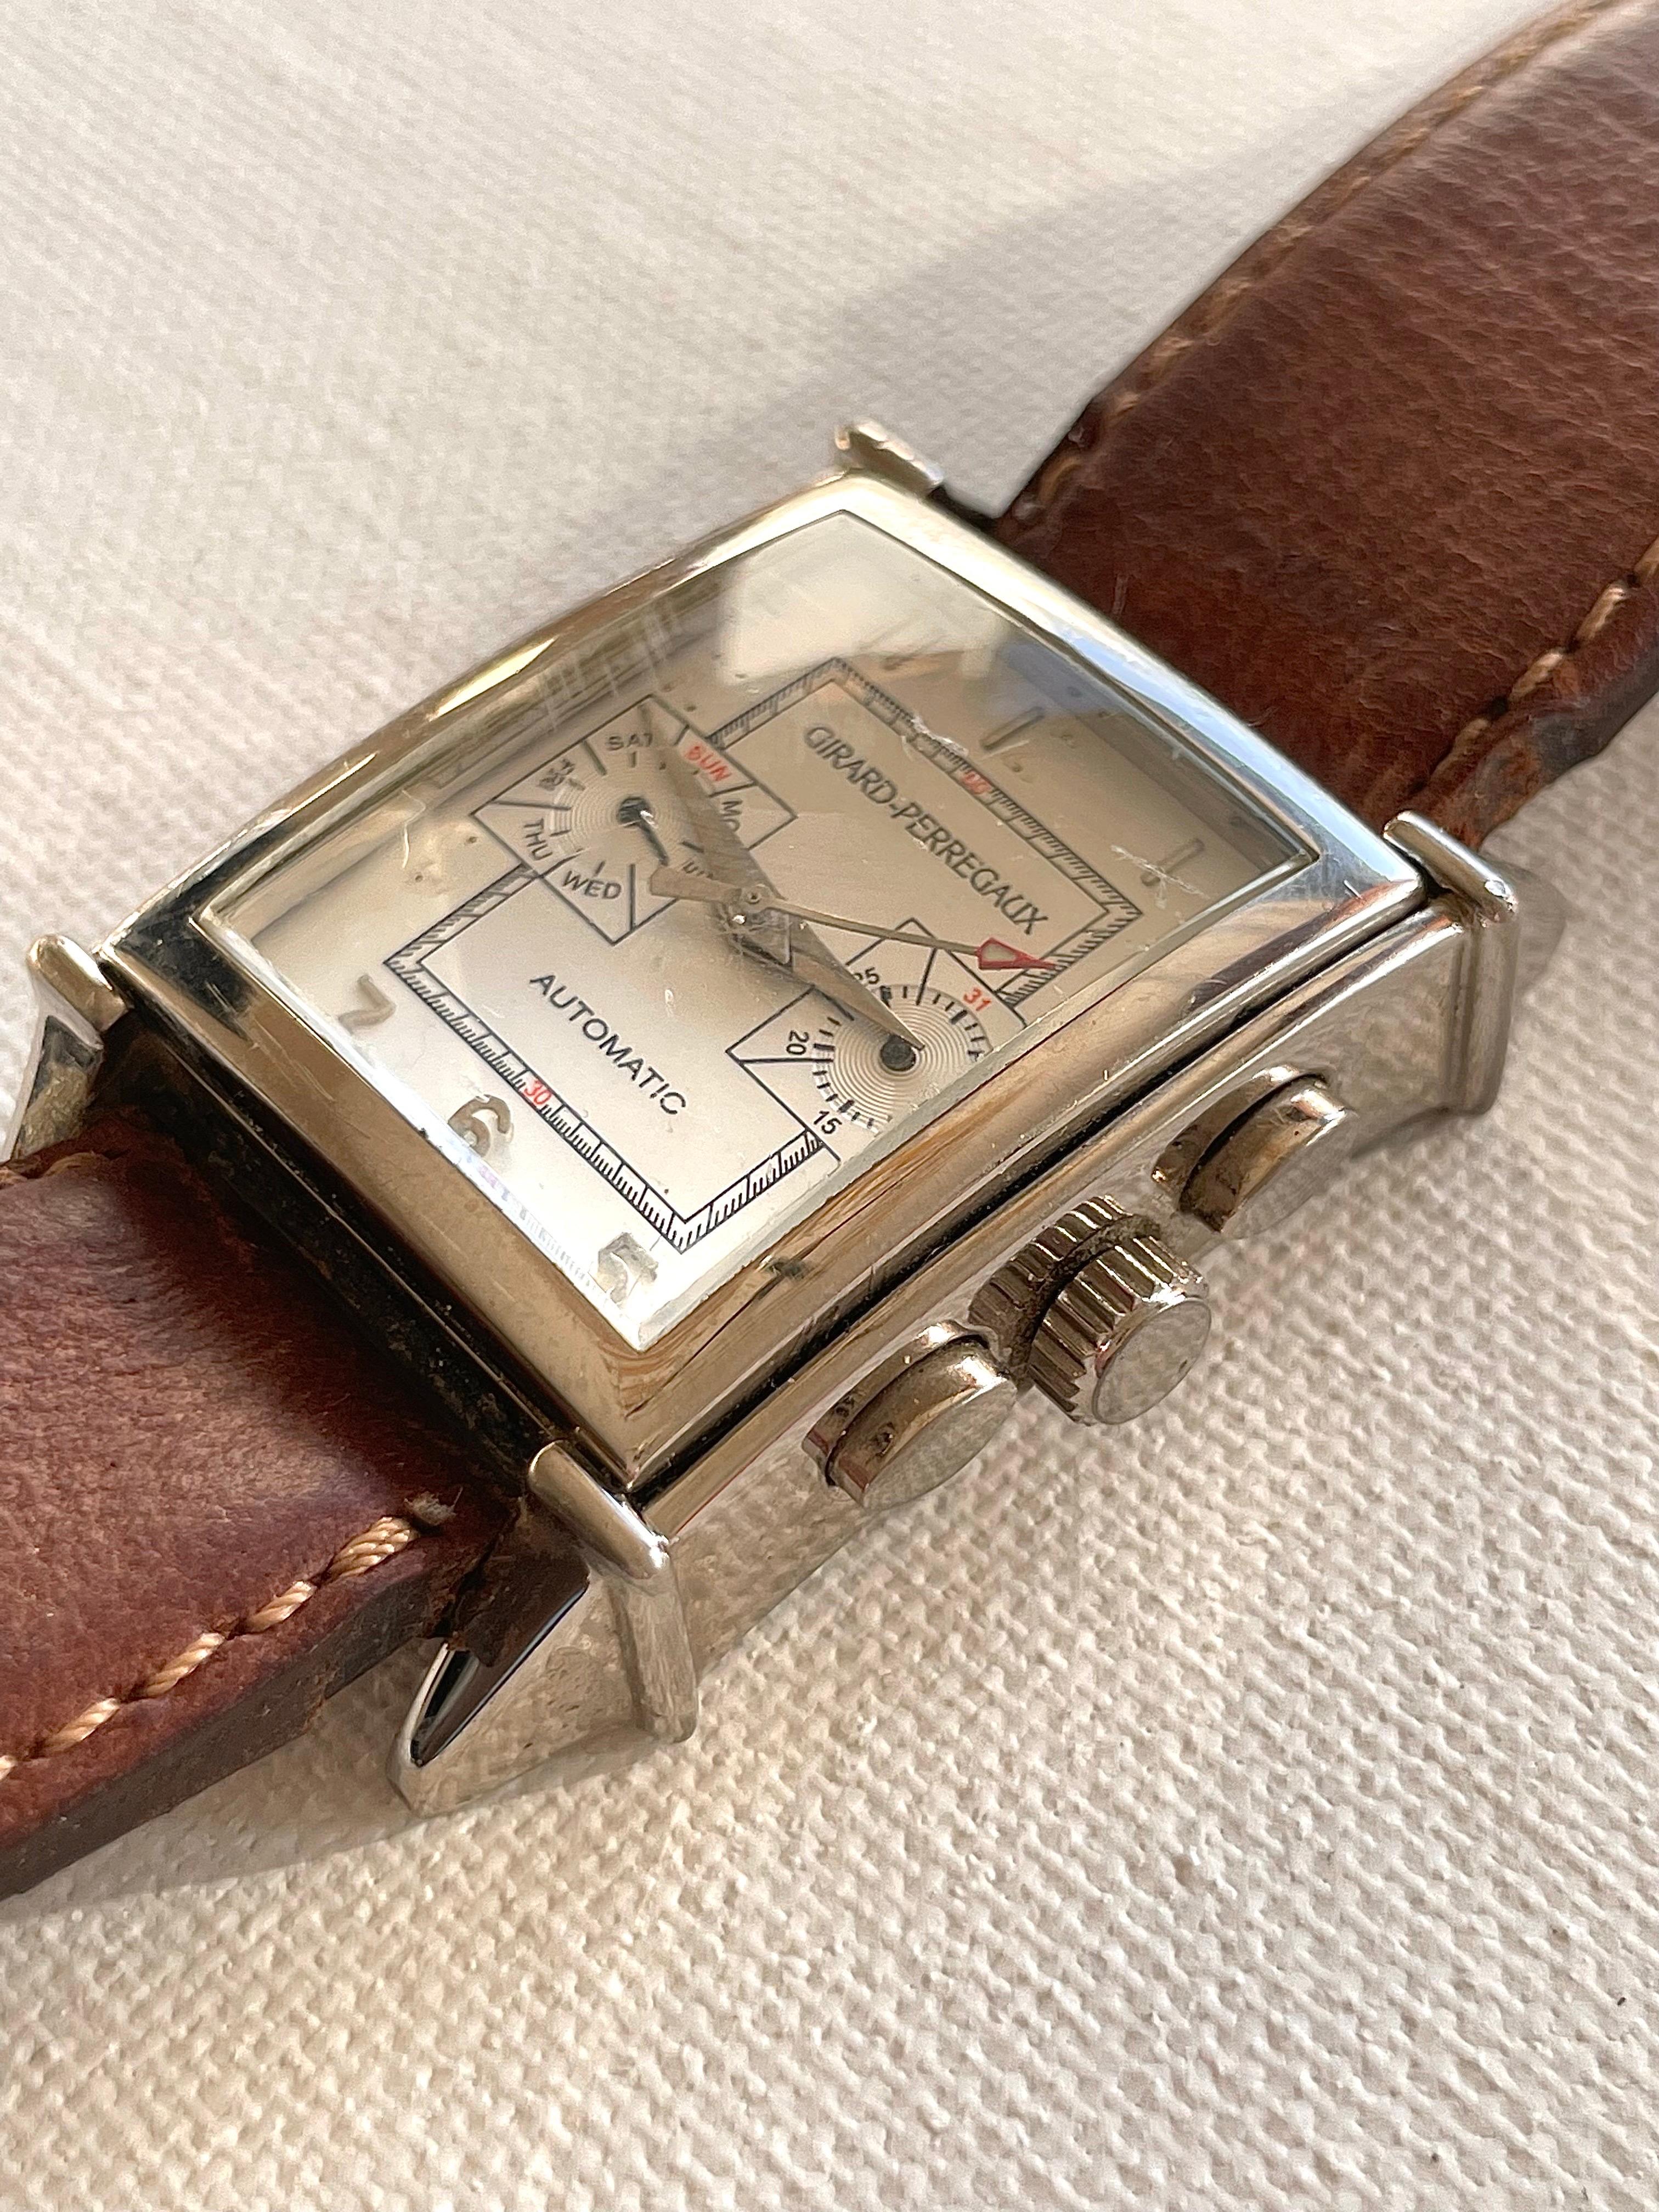 Beautiful collectors piece metal case chronograph wrist watch by Girard-Perregaux with time-date indication. OG number 21, building year 1999. This is a fully automatic watch working on the movement of the person wearing it. Brown leather strap with